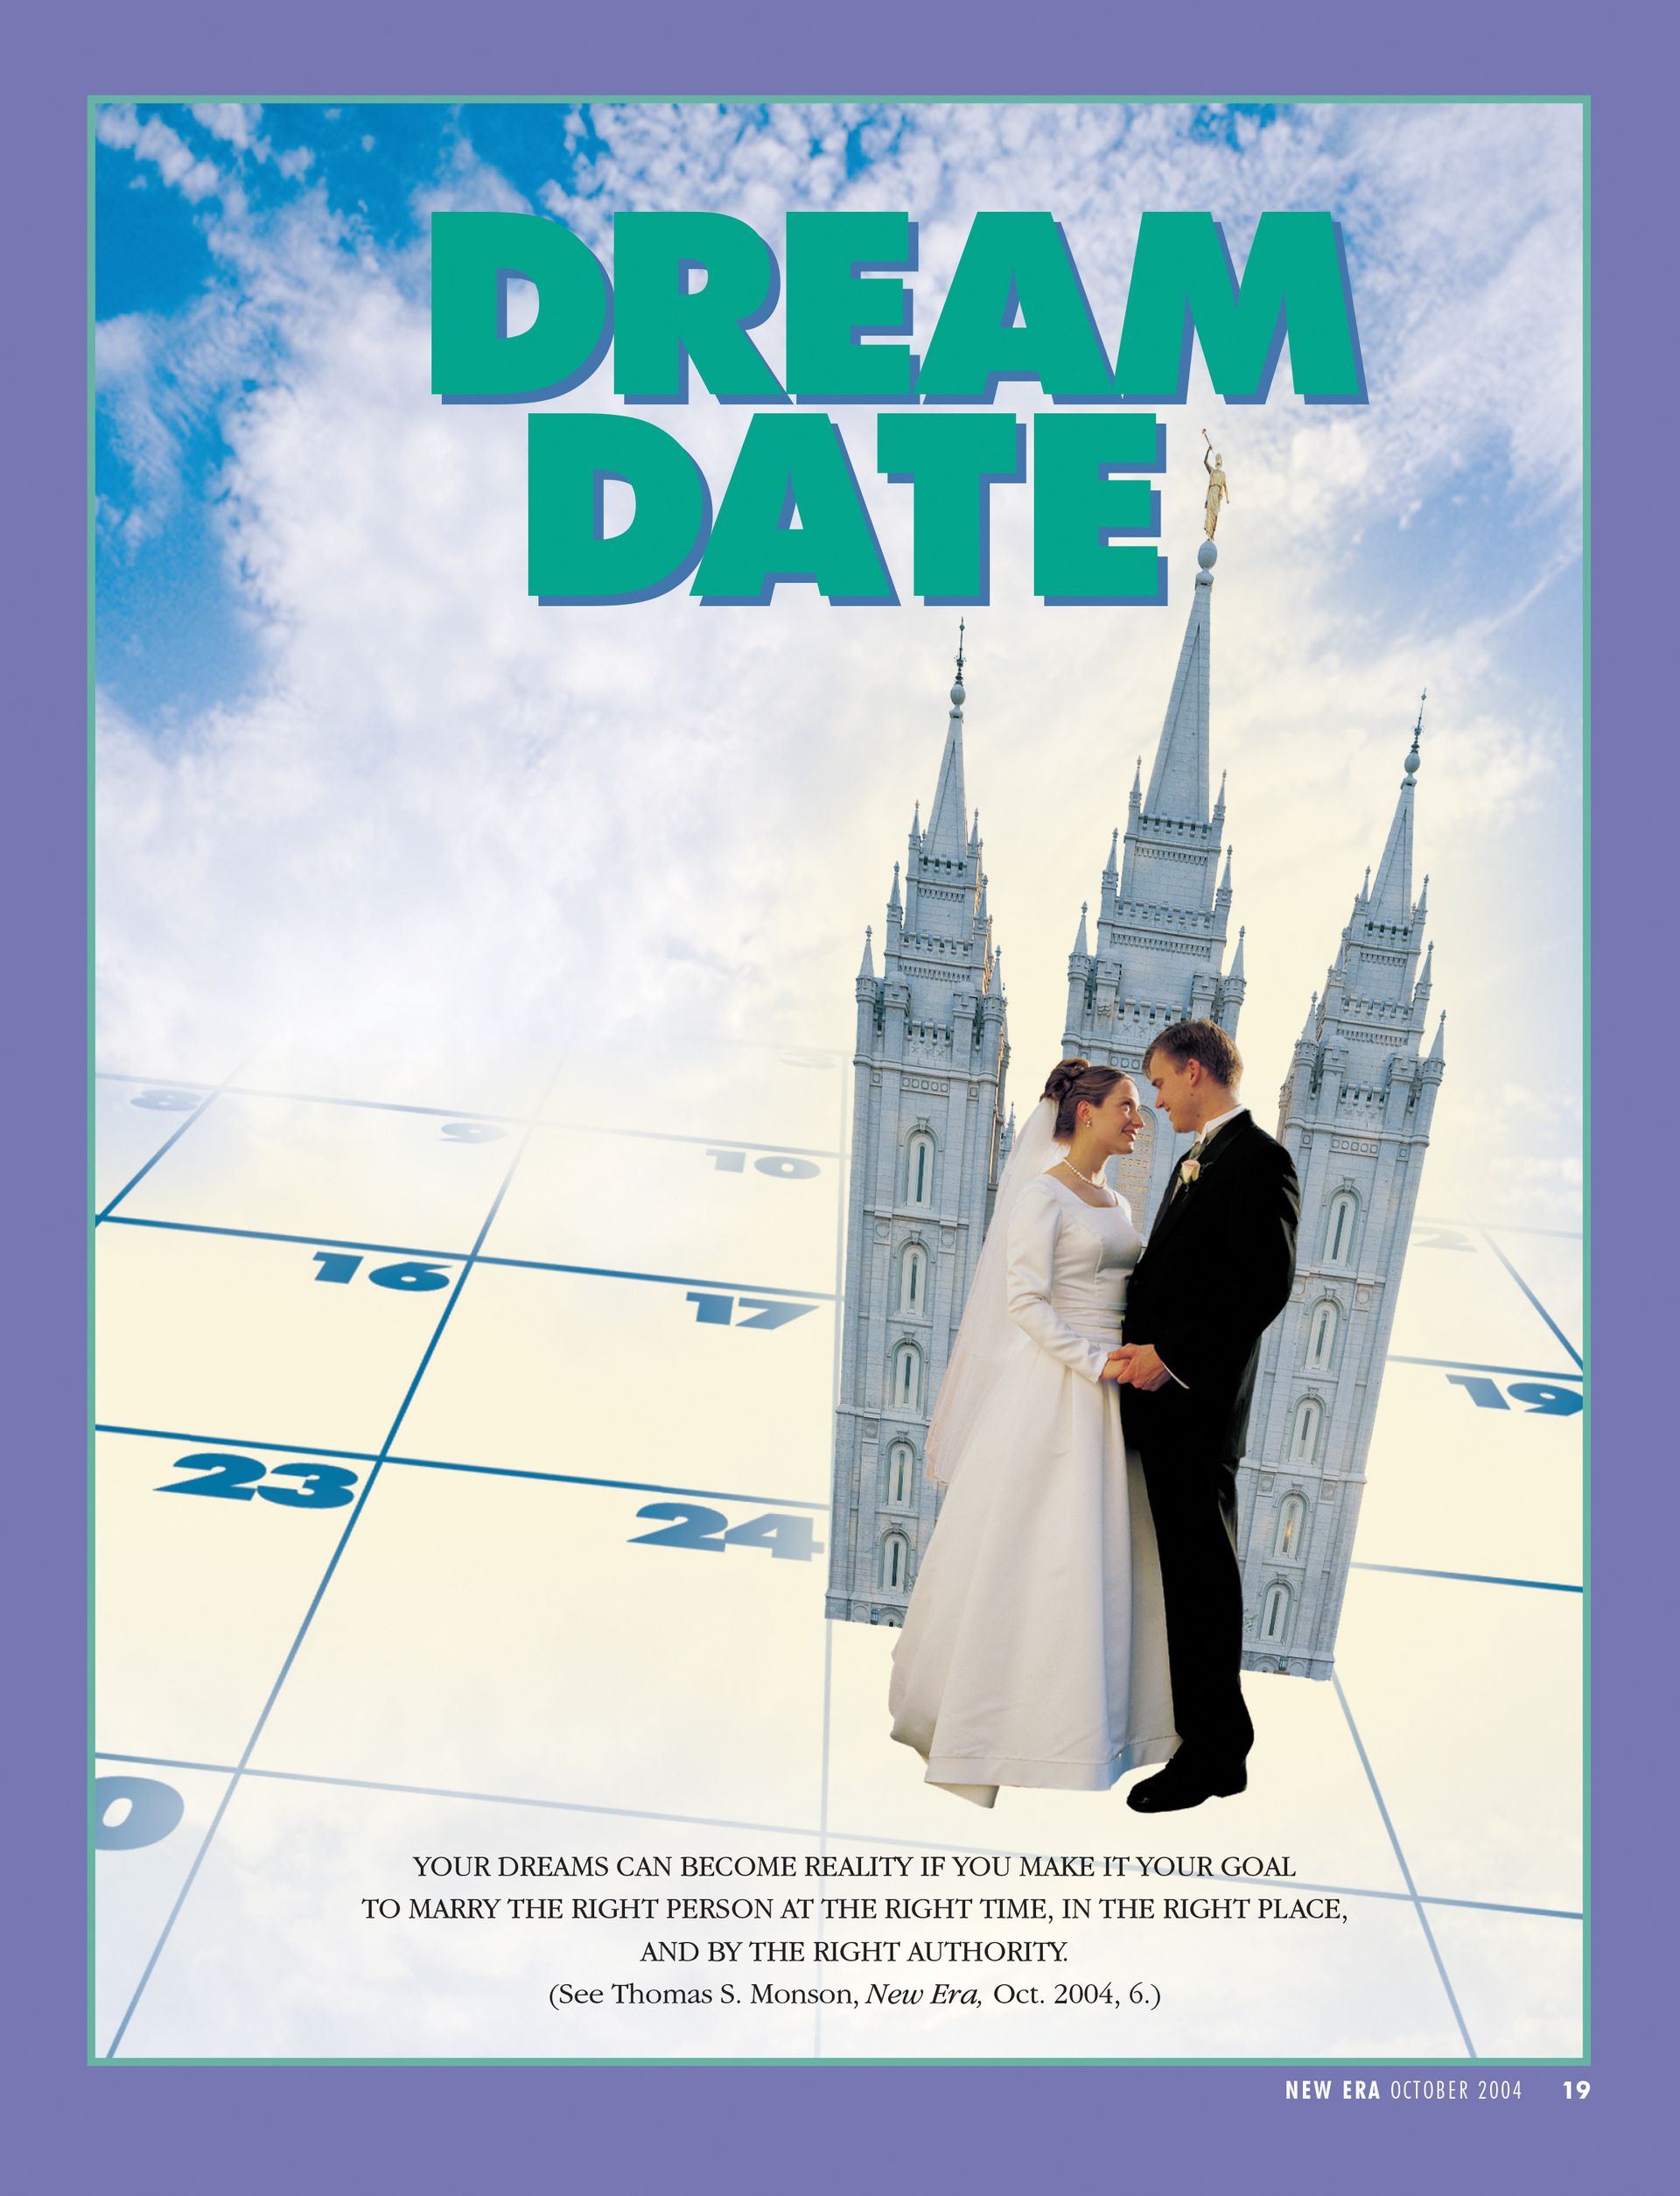 Dream Date. Your dreams can become reality if you make it your goal to marry the right person at the right time, in the right place, and by the right authority. (See Thomas S. Monson, New Era, Oct. 2004, 6.) Oct. 2004 © undefined ipCode 1.